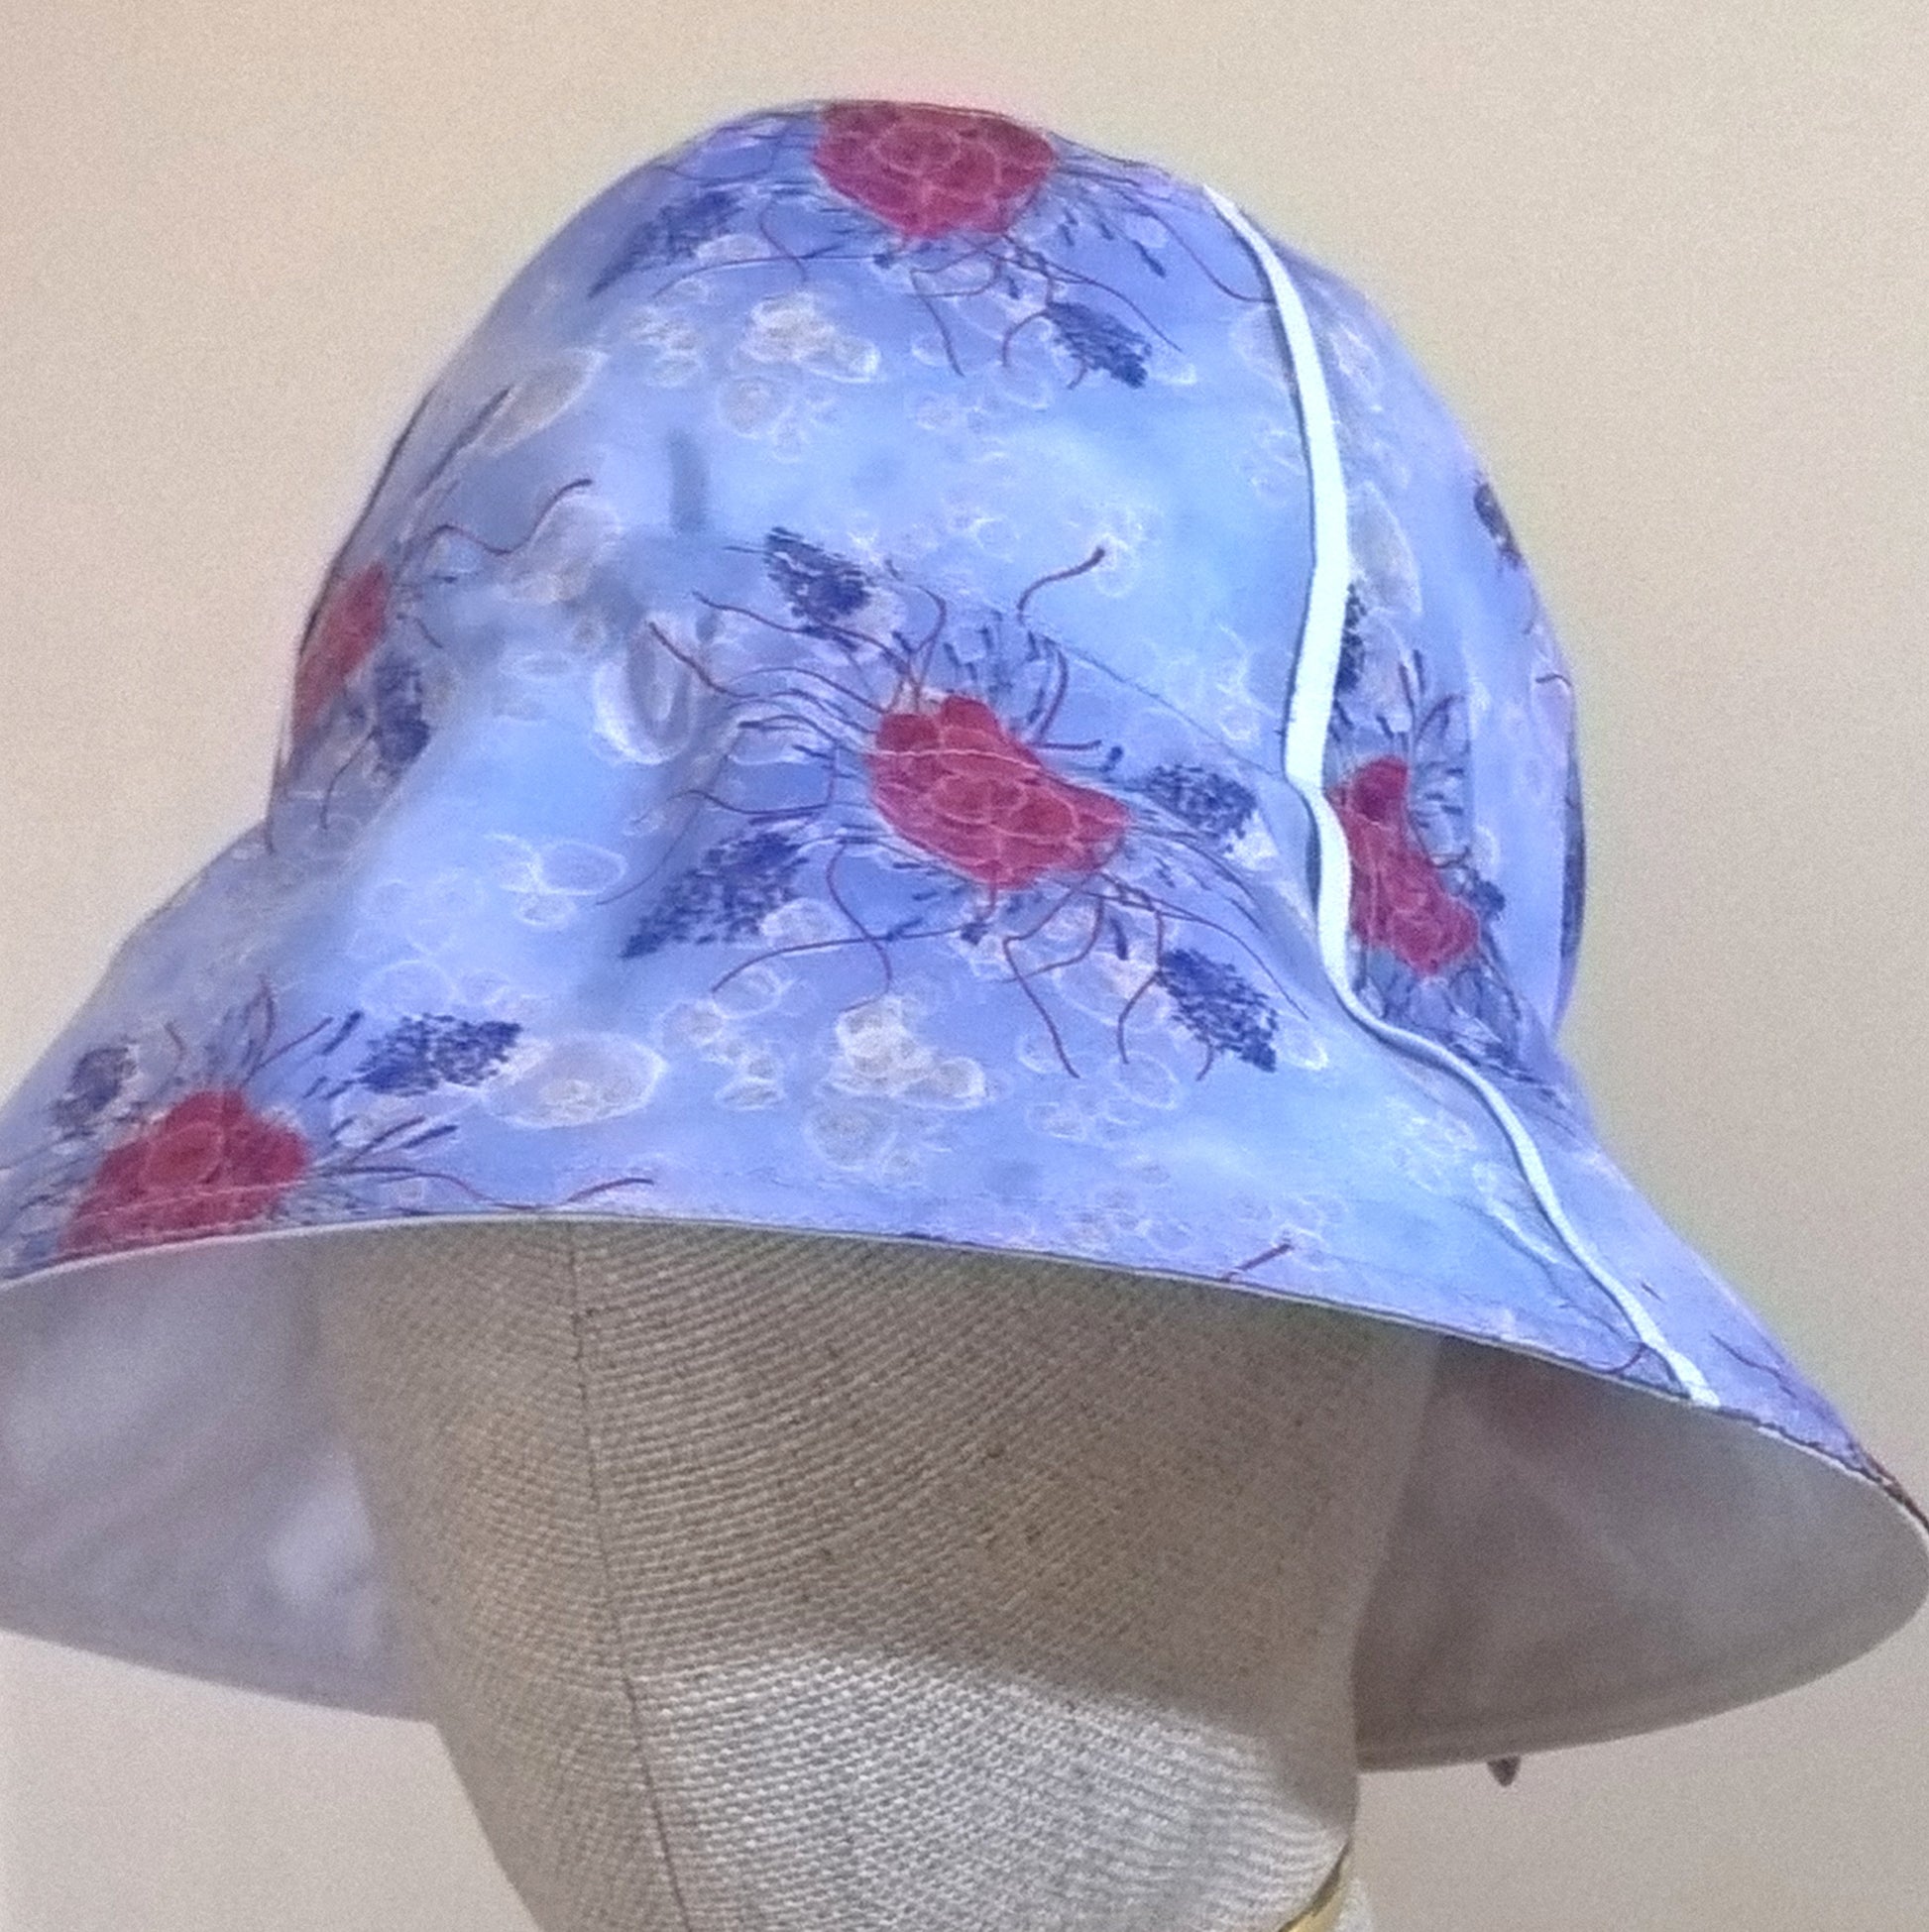 The cotton silk bucket hat has a wired brim and white piping